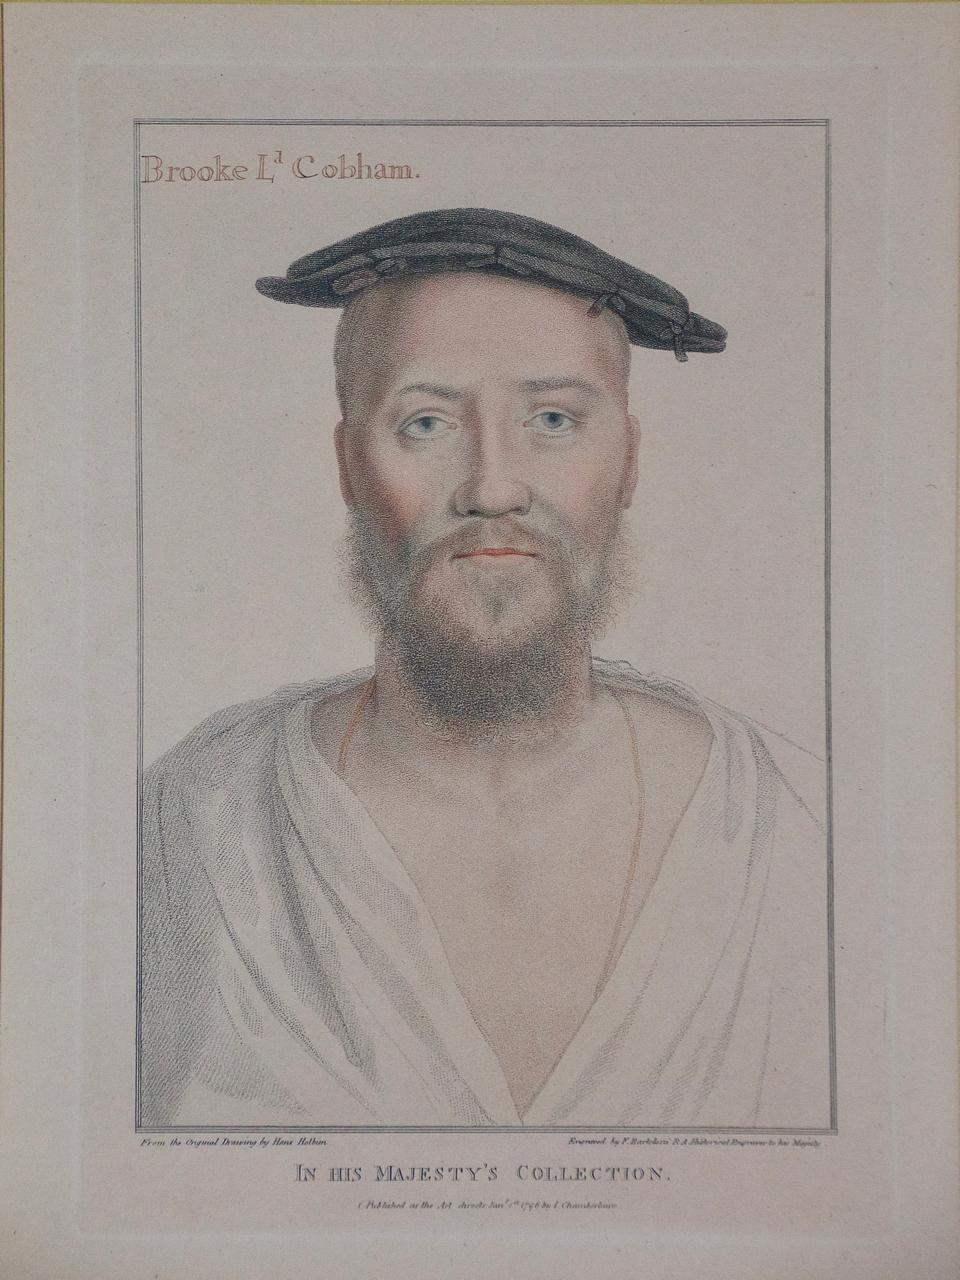 18th C. Bartolozzi Portrait of Brooke Cobham from a 16th Century Holbein Drawing - Print by Hans Holbein